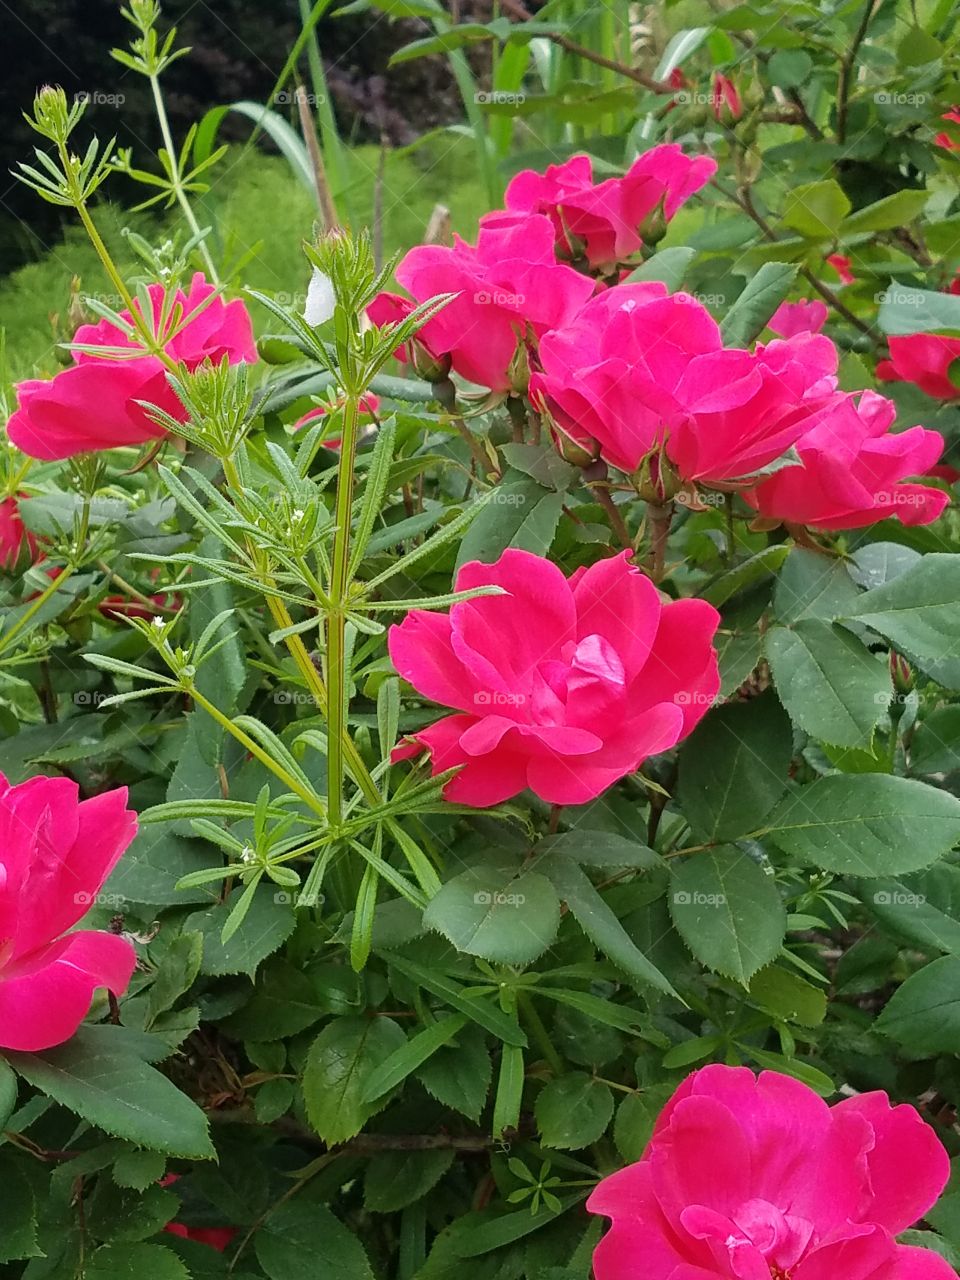 Gorgeous pink flowers